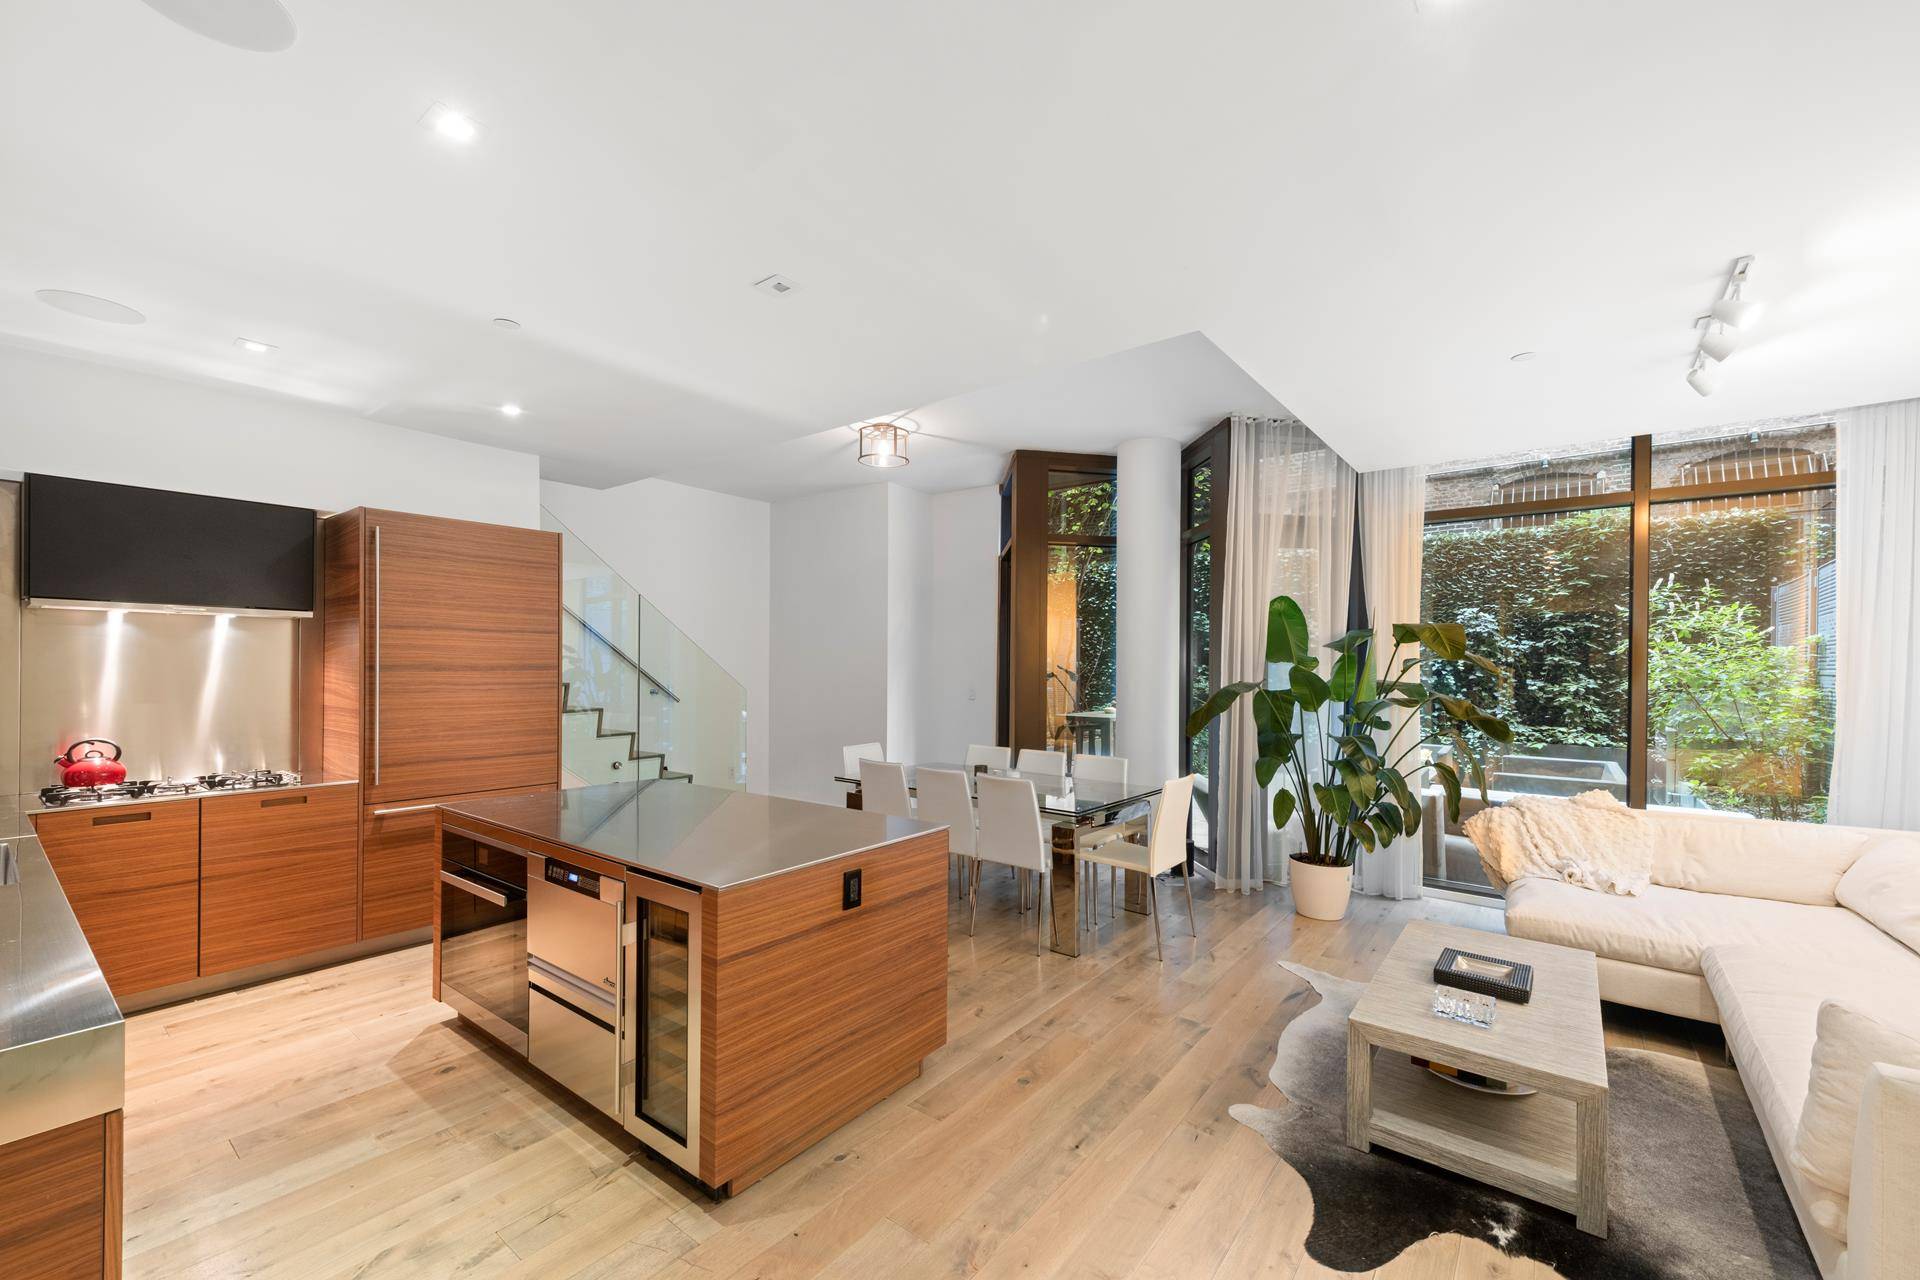 Introducing Townhouse 2 at the highly sought after boutique condo 15 Renwick Street.